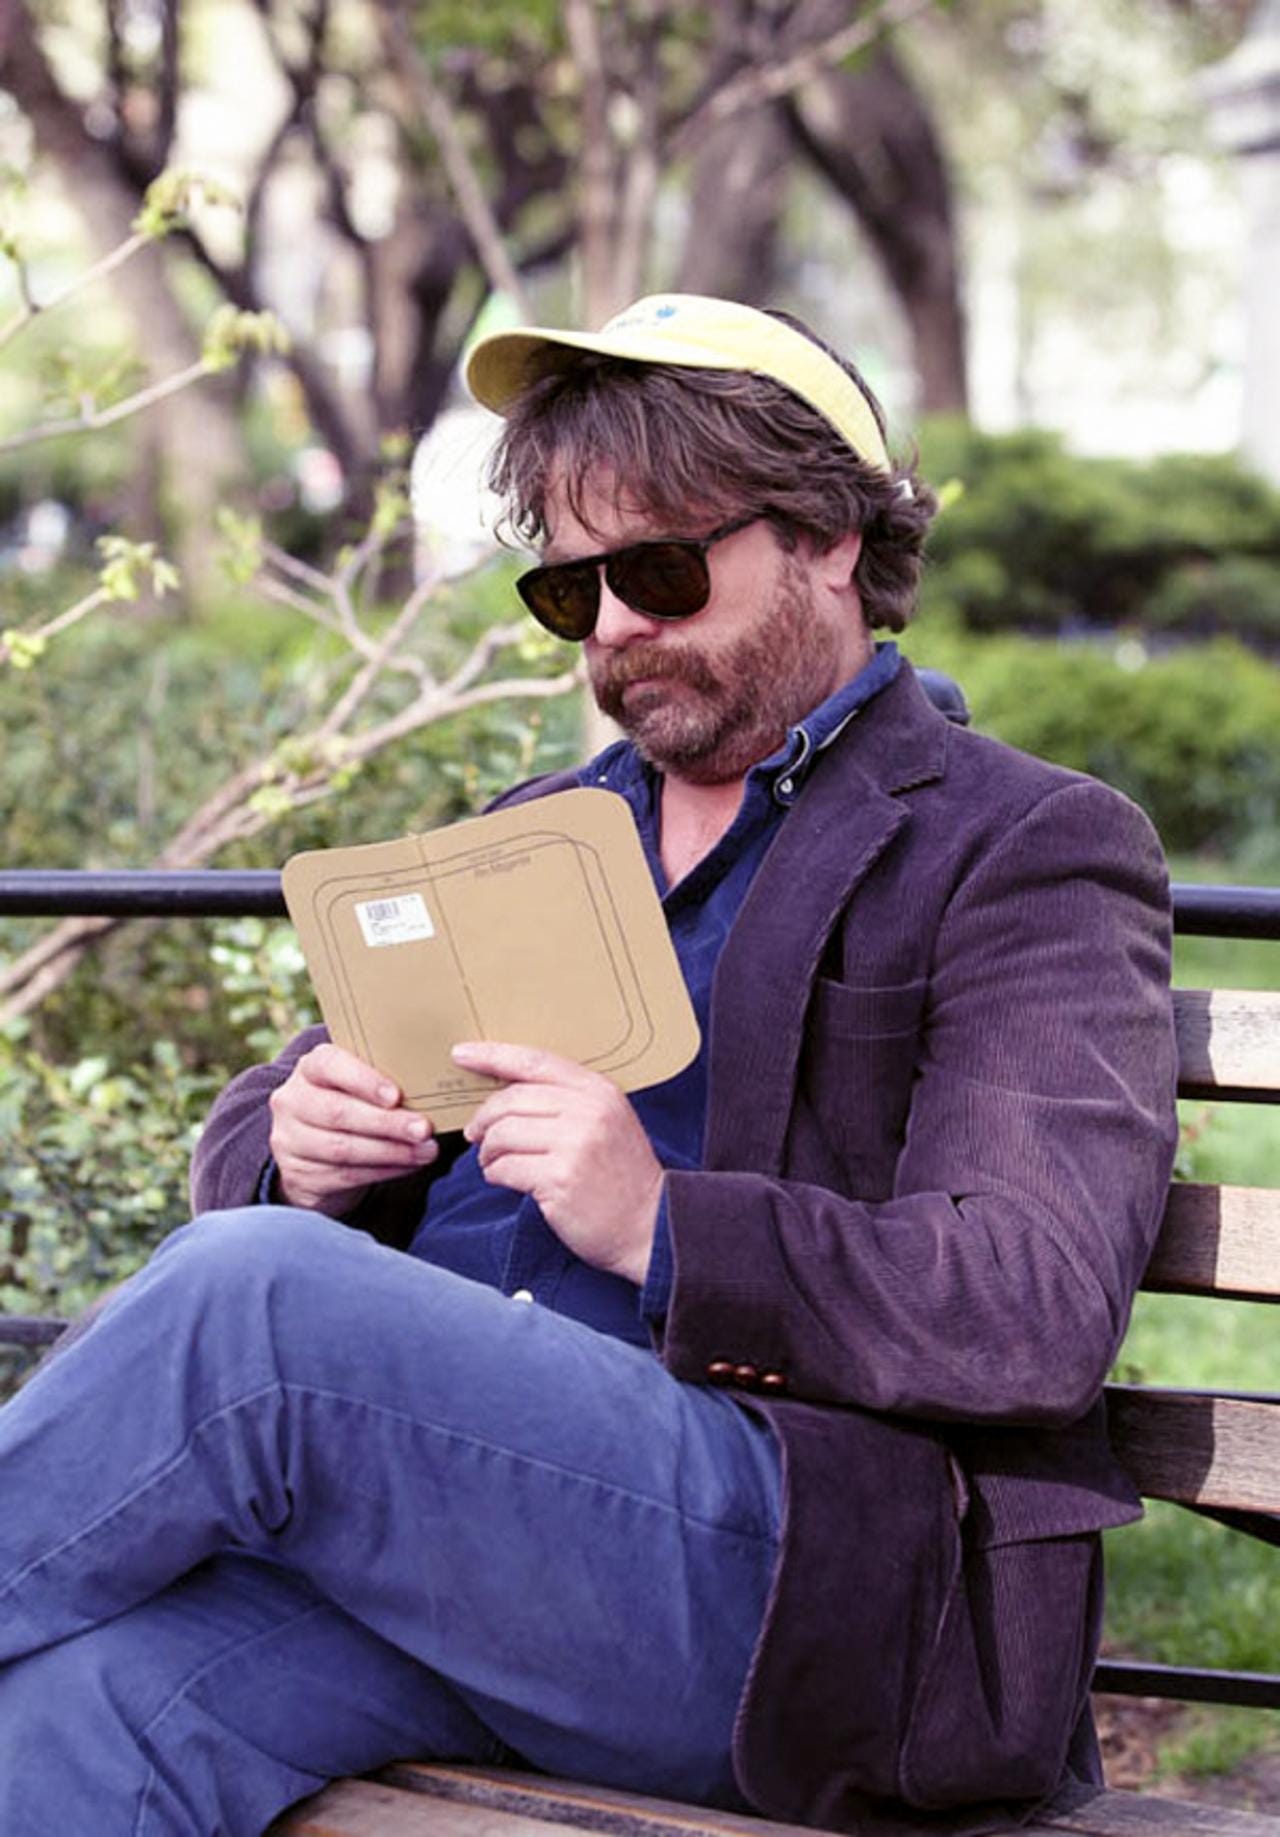 Actor and comedian Zach Galifianakis reads Corina Copp's "Pro Magenta" in Union Square Park. Zach was in the park to film a "Funny Or Die" spot.